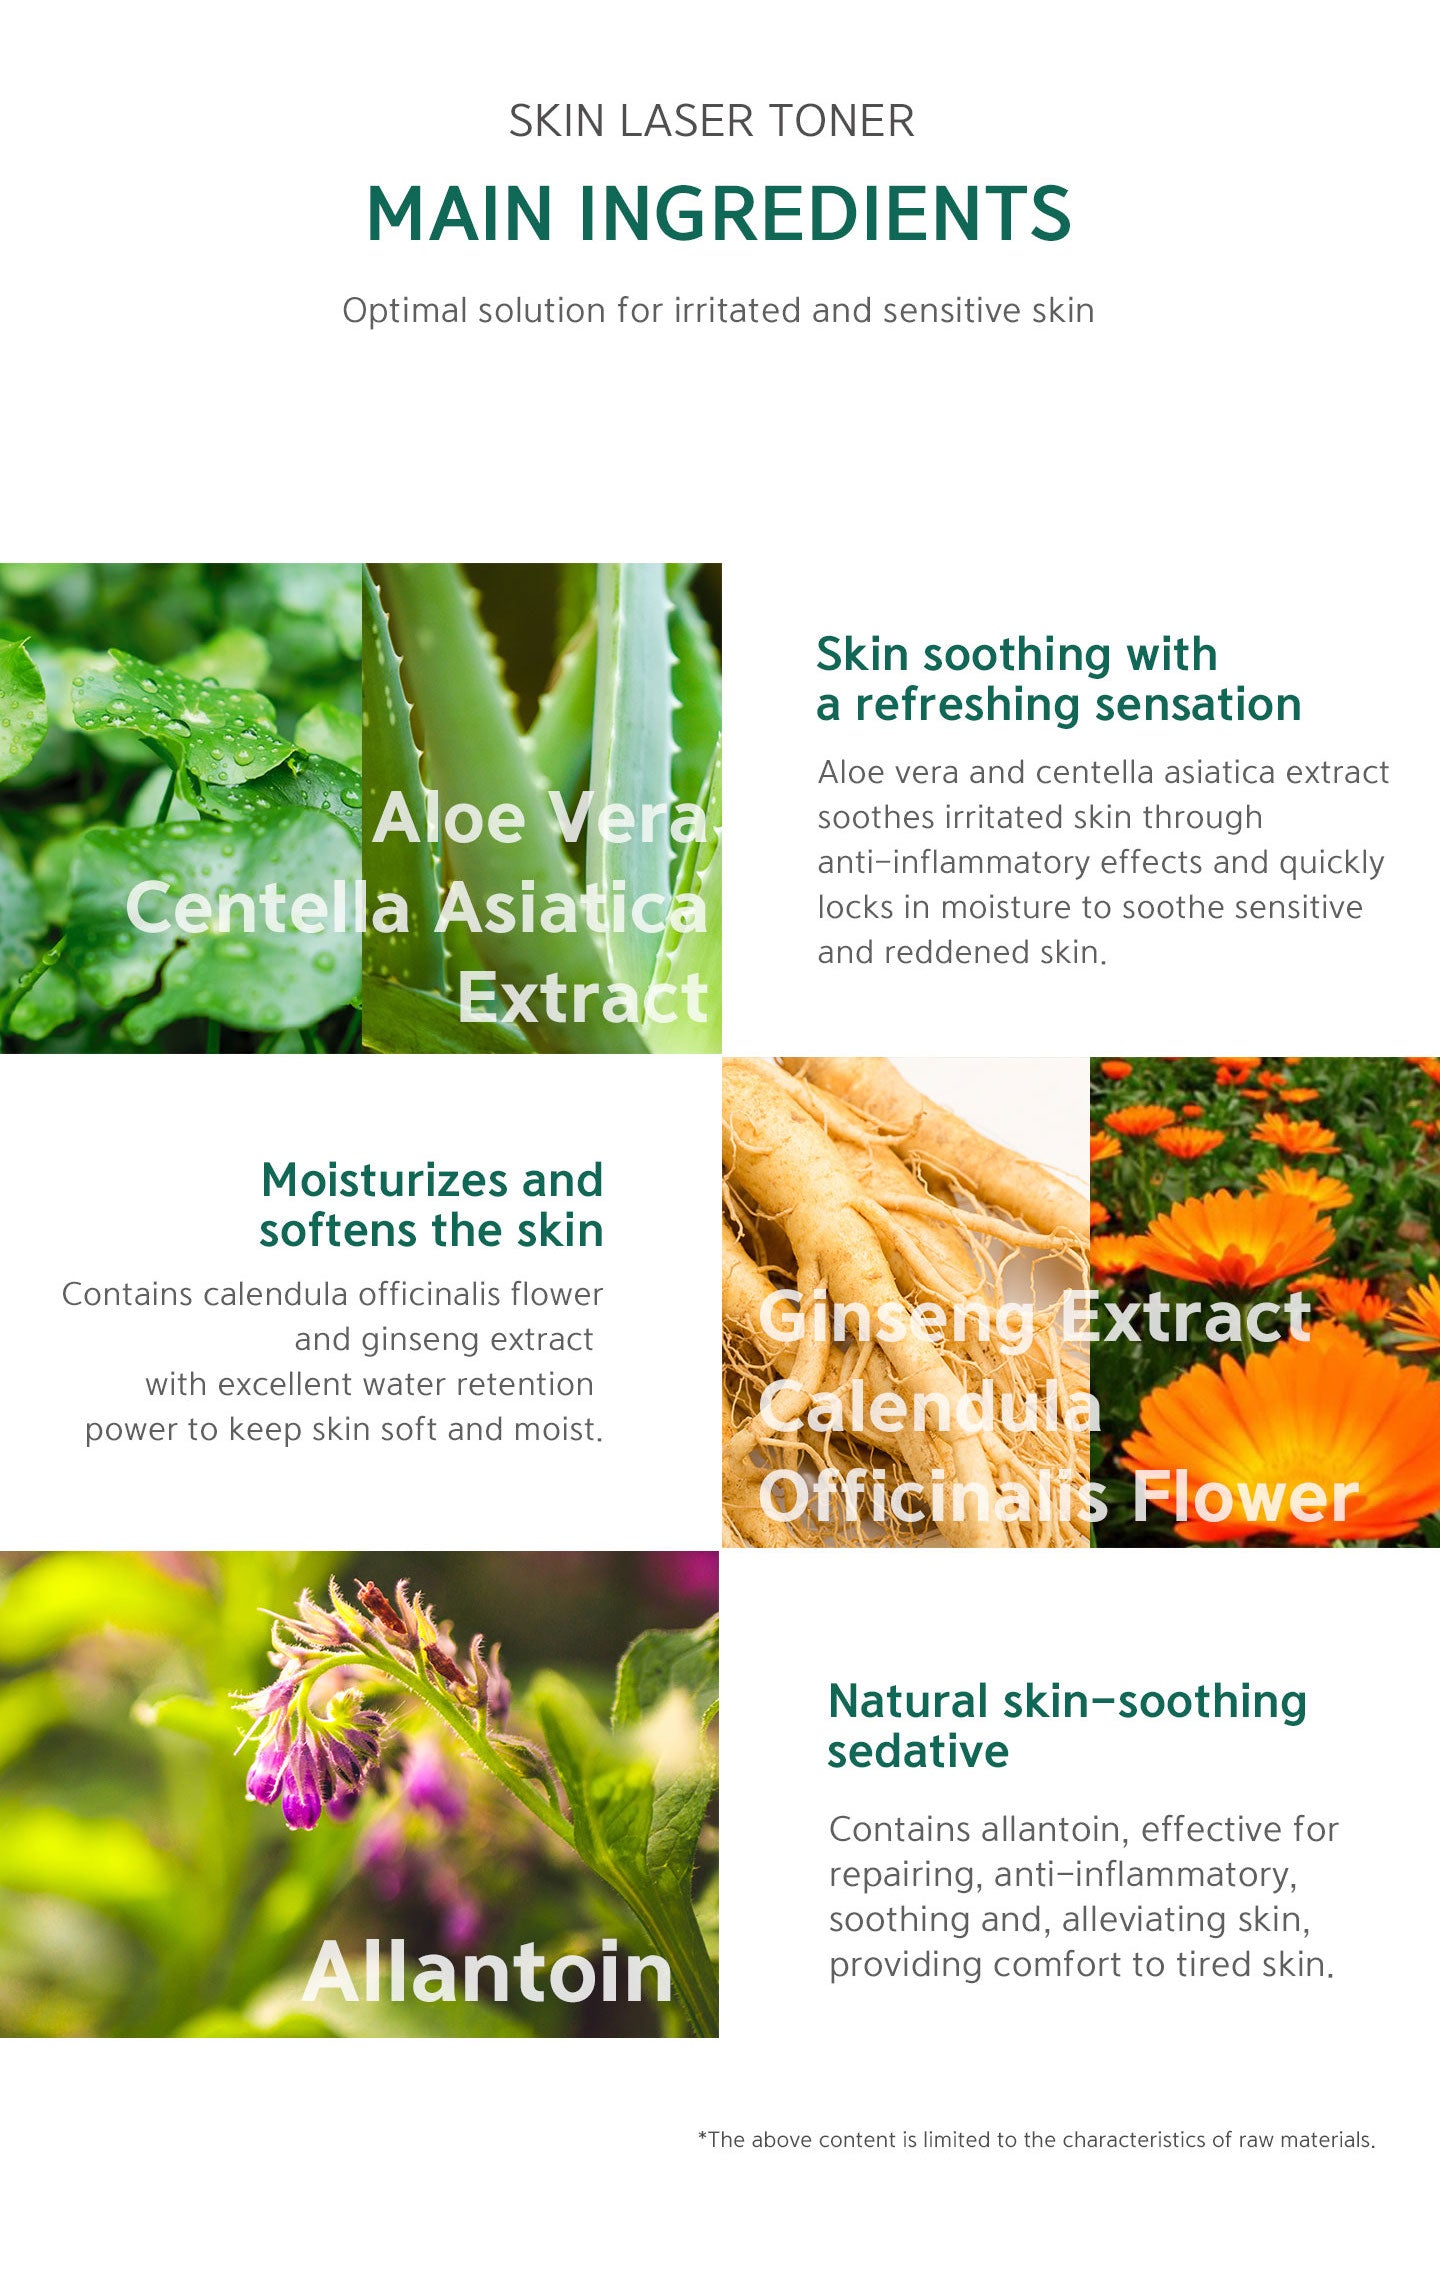 Aloe vera and centella asiatica extract soothes irritated skin through anti-inflammatory effects. Ginseng extract and calendula officinalis flower with excellent water retention power. Allantoin is effective for repairing, anti-inflammatory, soothing.   